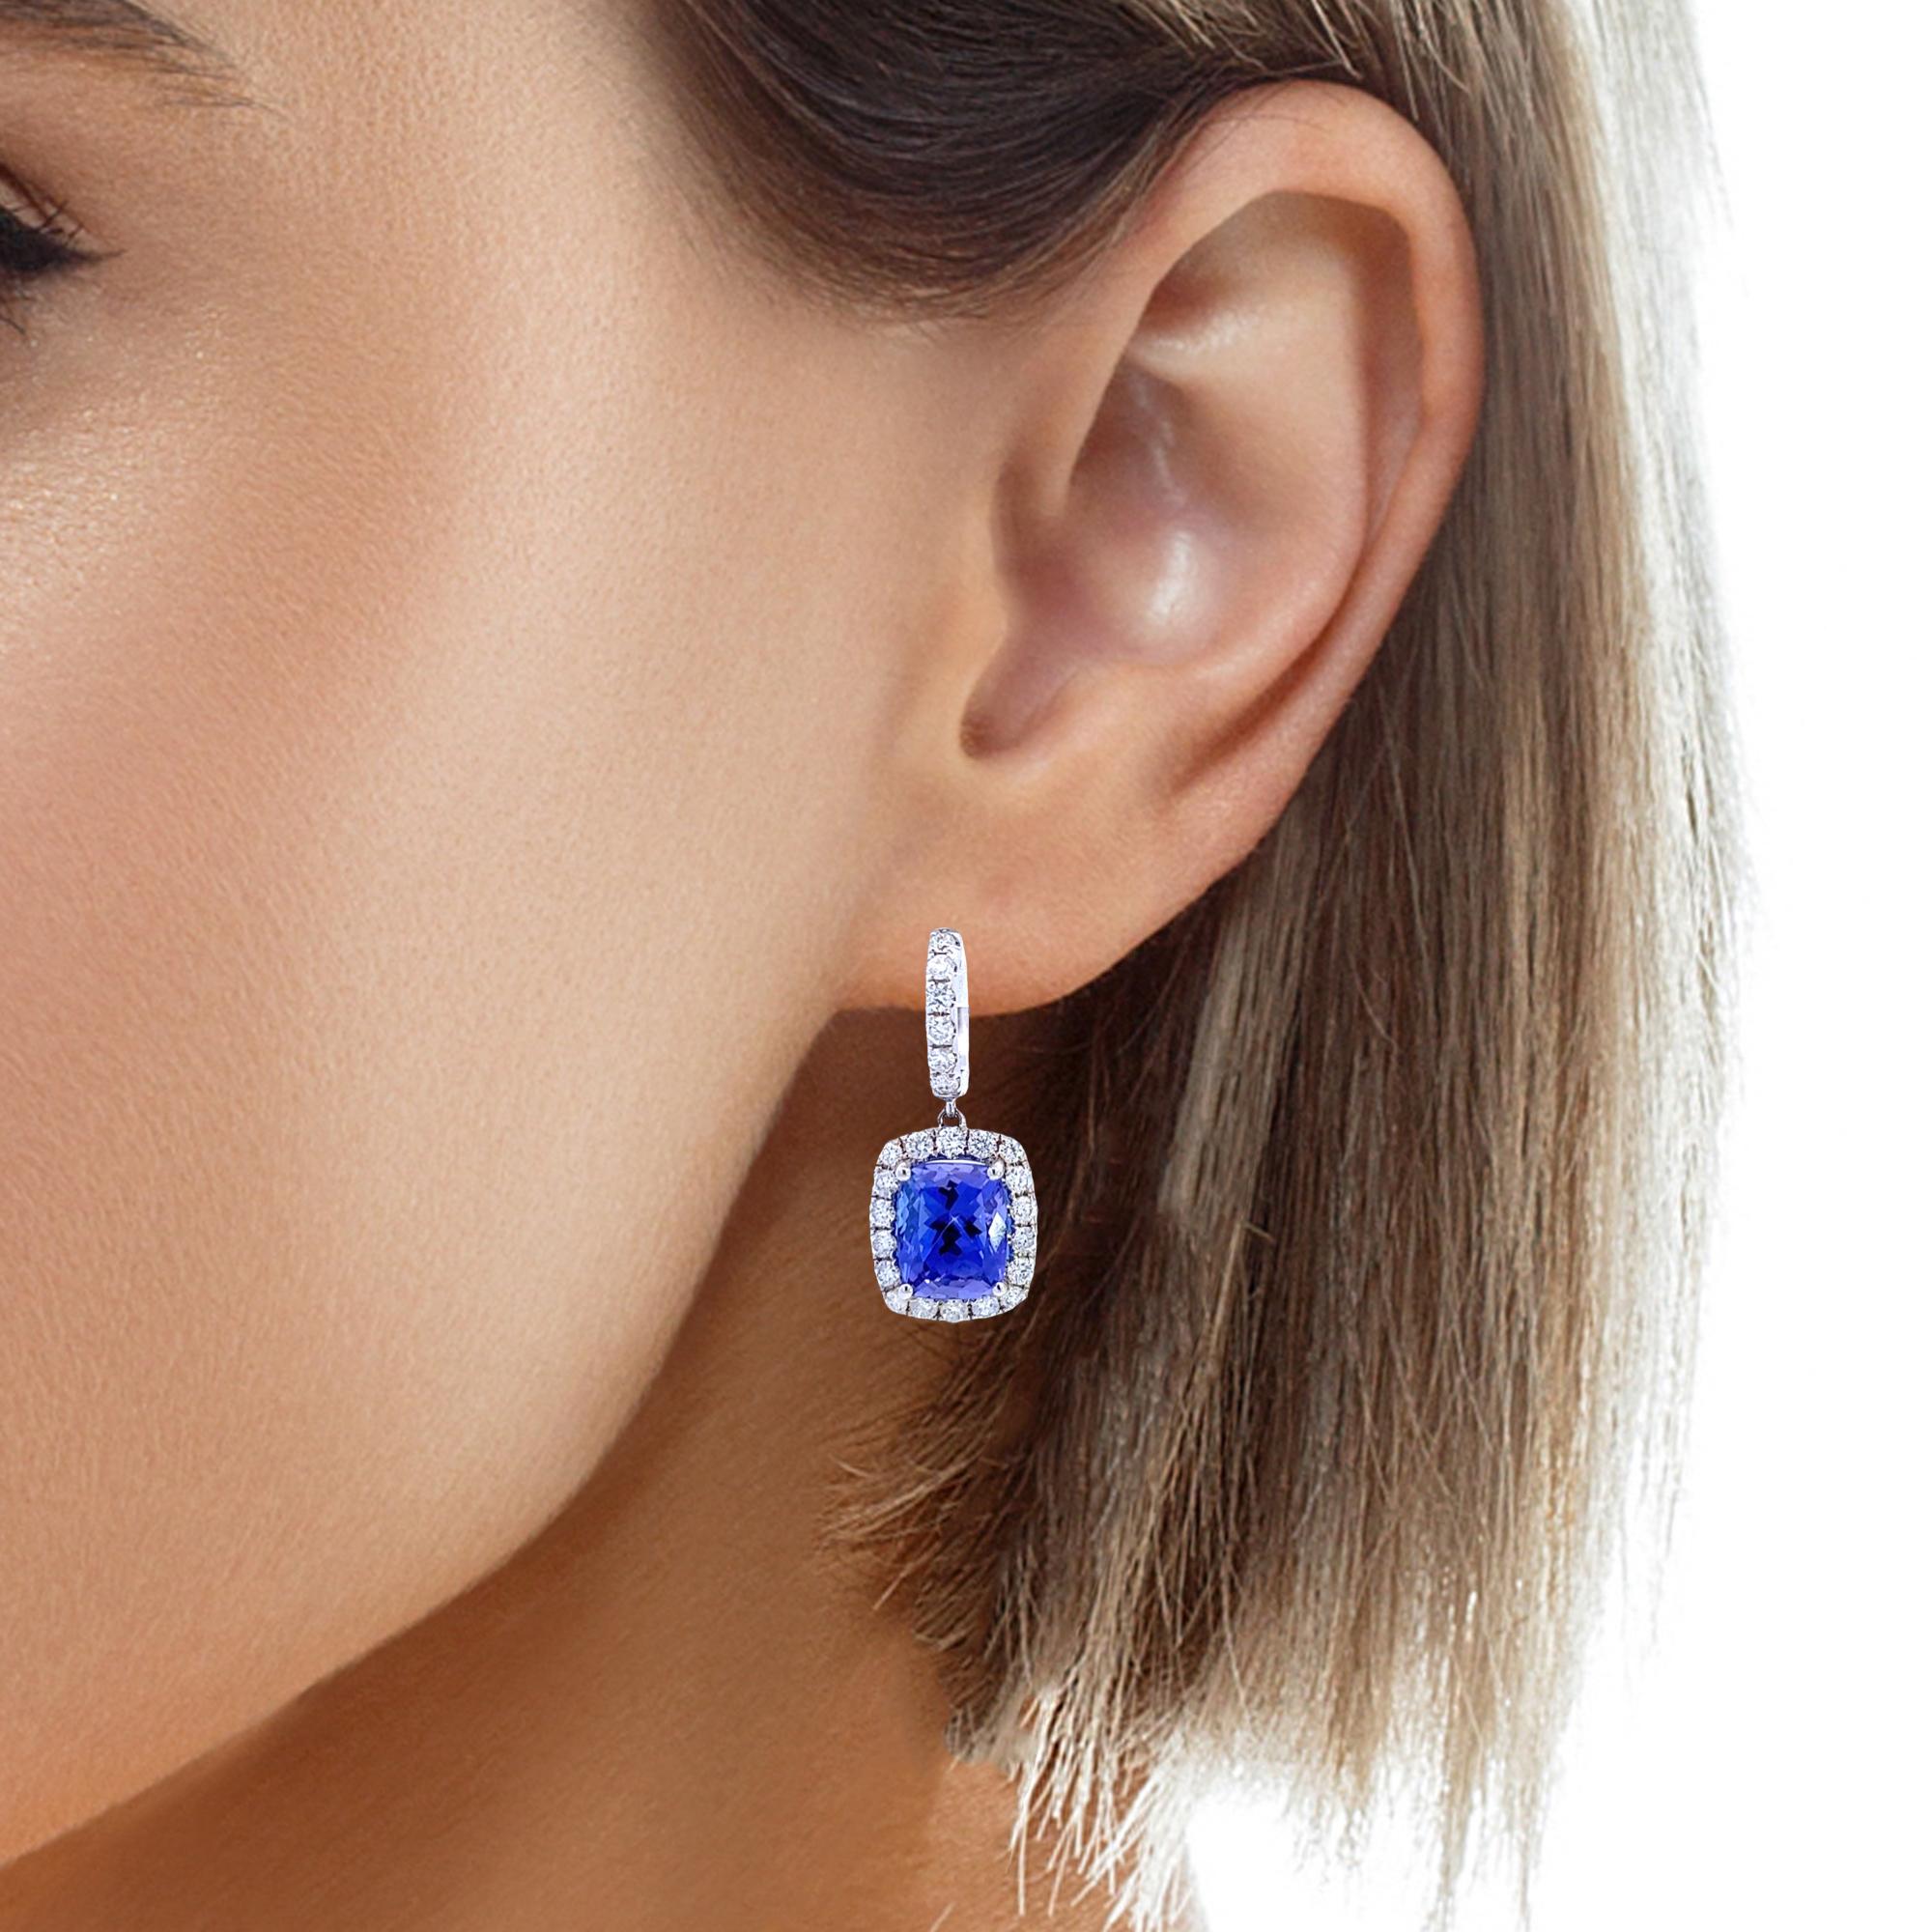 Introducing a mesmerizing masterpiece of luxury and elegance: the 18K White Gold Tanzanite and Diamond Earrings. These exquisite earrings are a true celebration of sophistication, featuring a remarkable duo of precious gemstones that unite to create